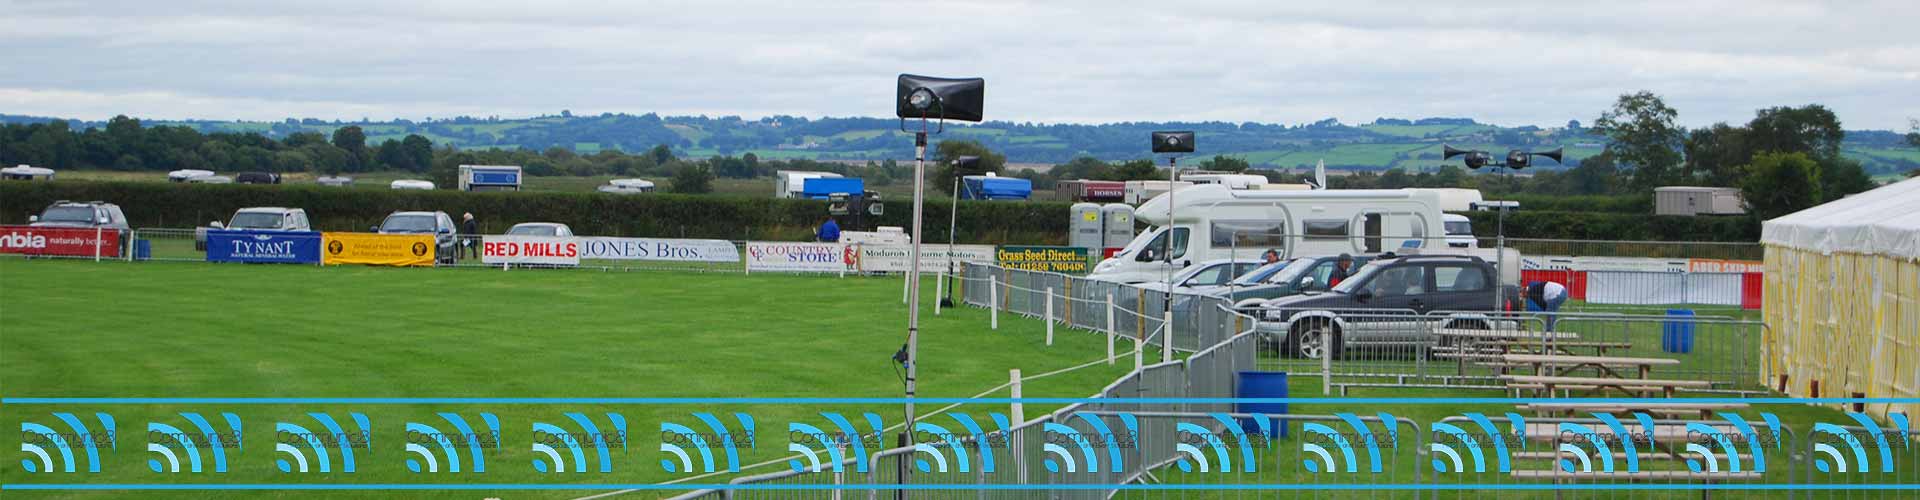 Outdoor Loudspeaker Tannoy Speaker Hire South and Mid Wales